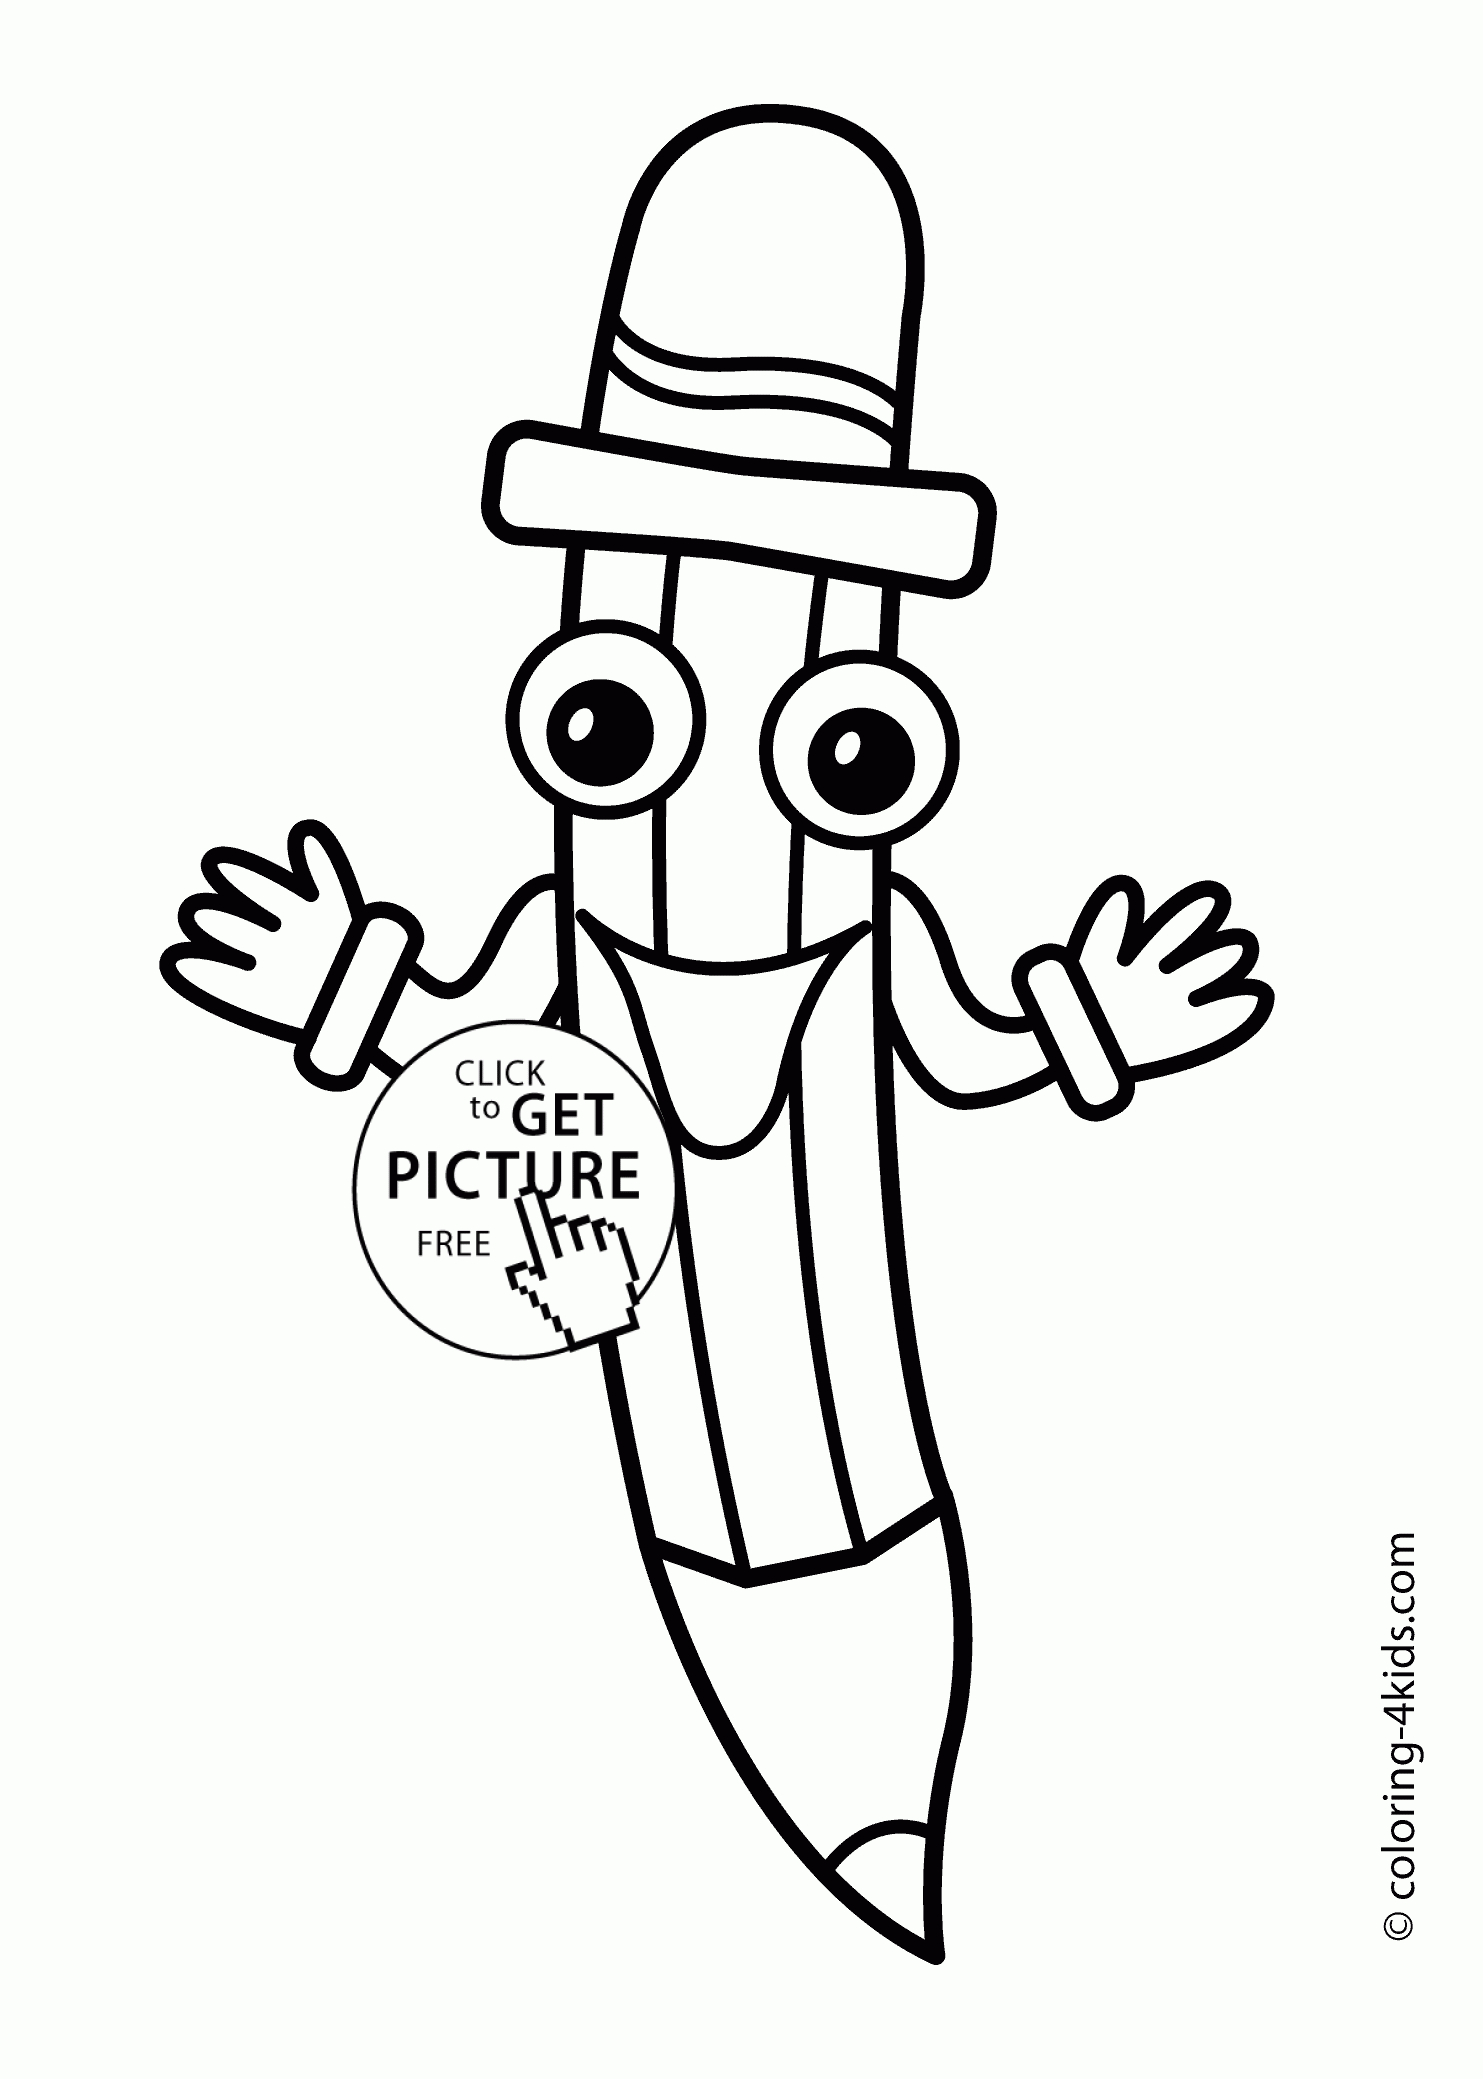 School Pencil Man Coloring Page, Classes Coloring Page For Kids - Free Printable Pencil Drawings